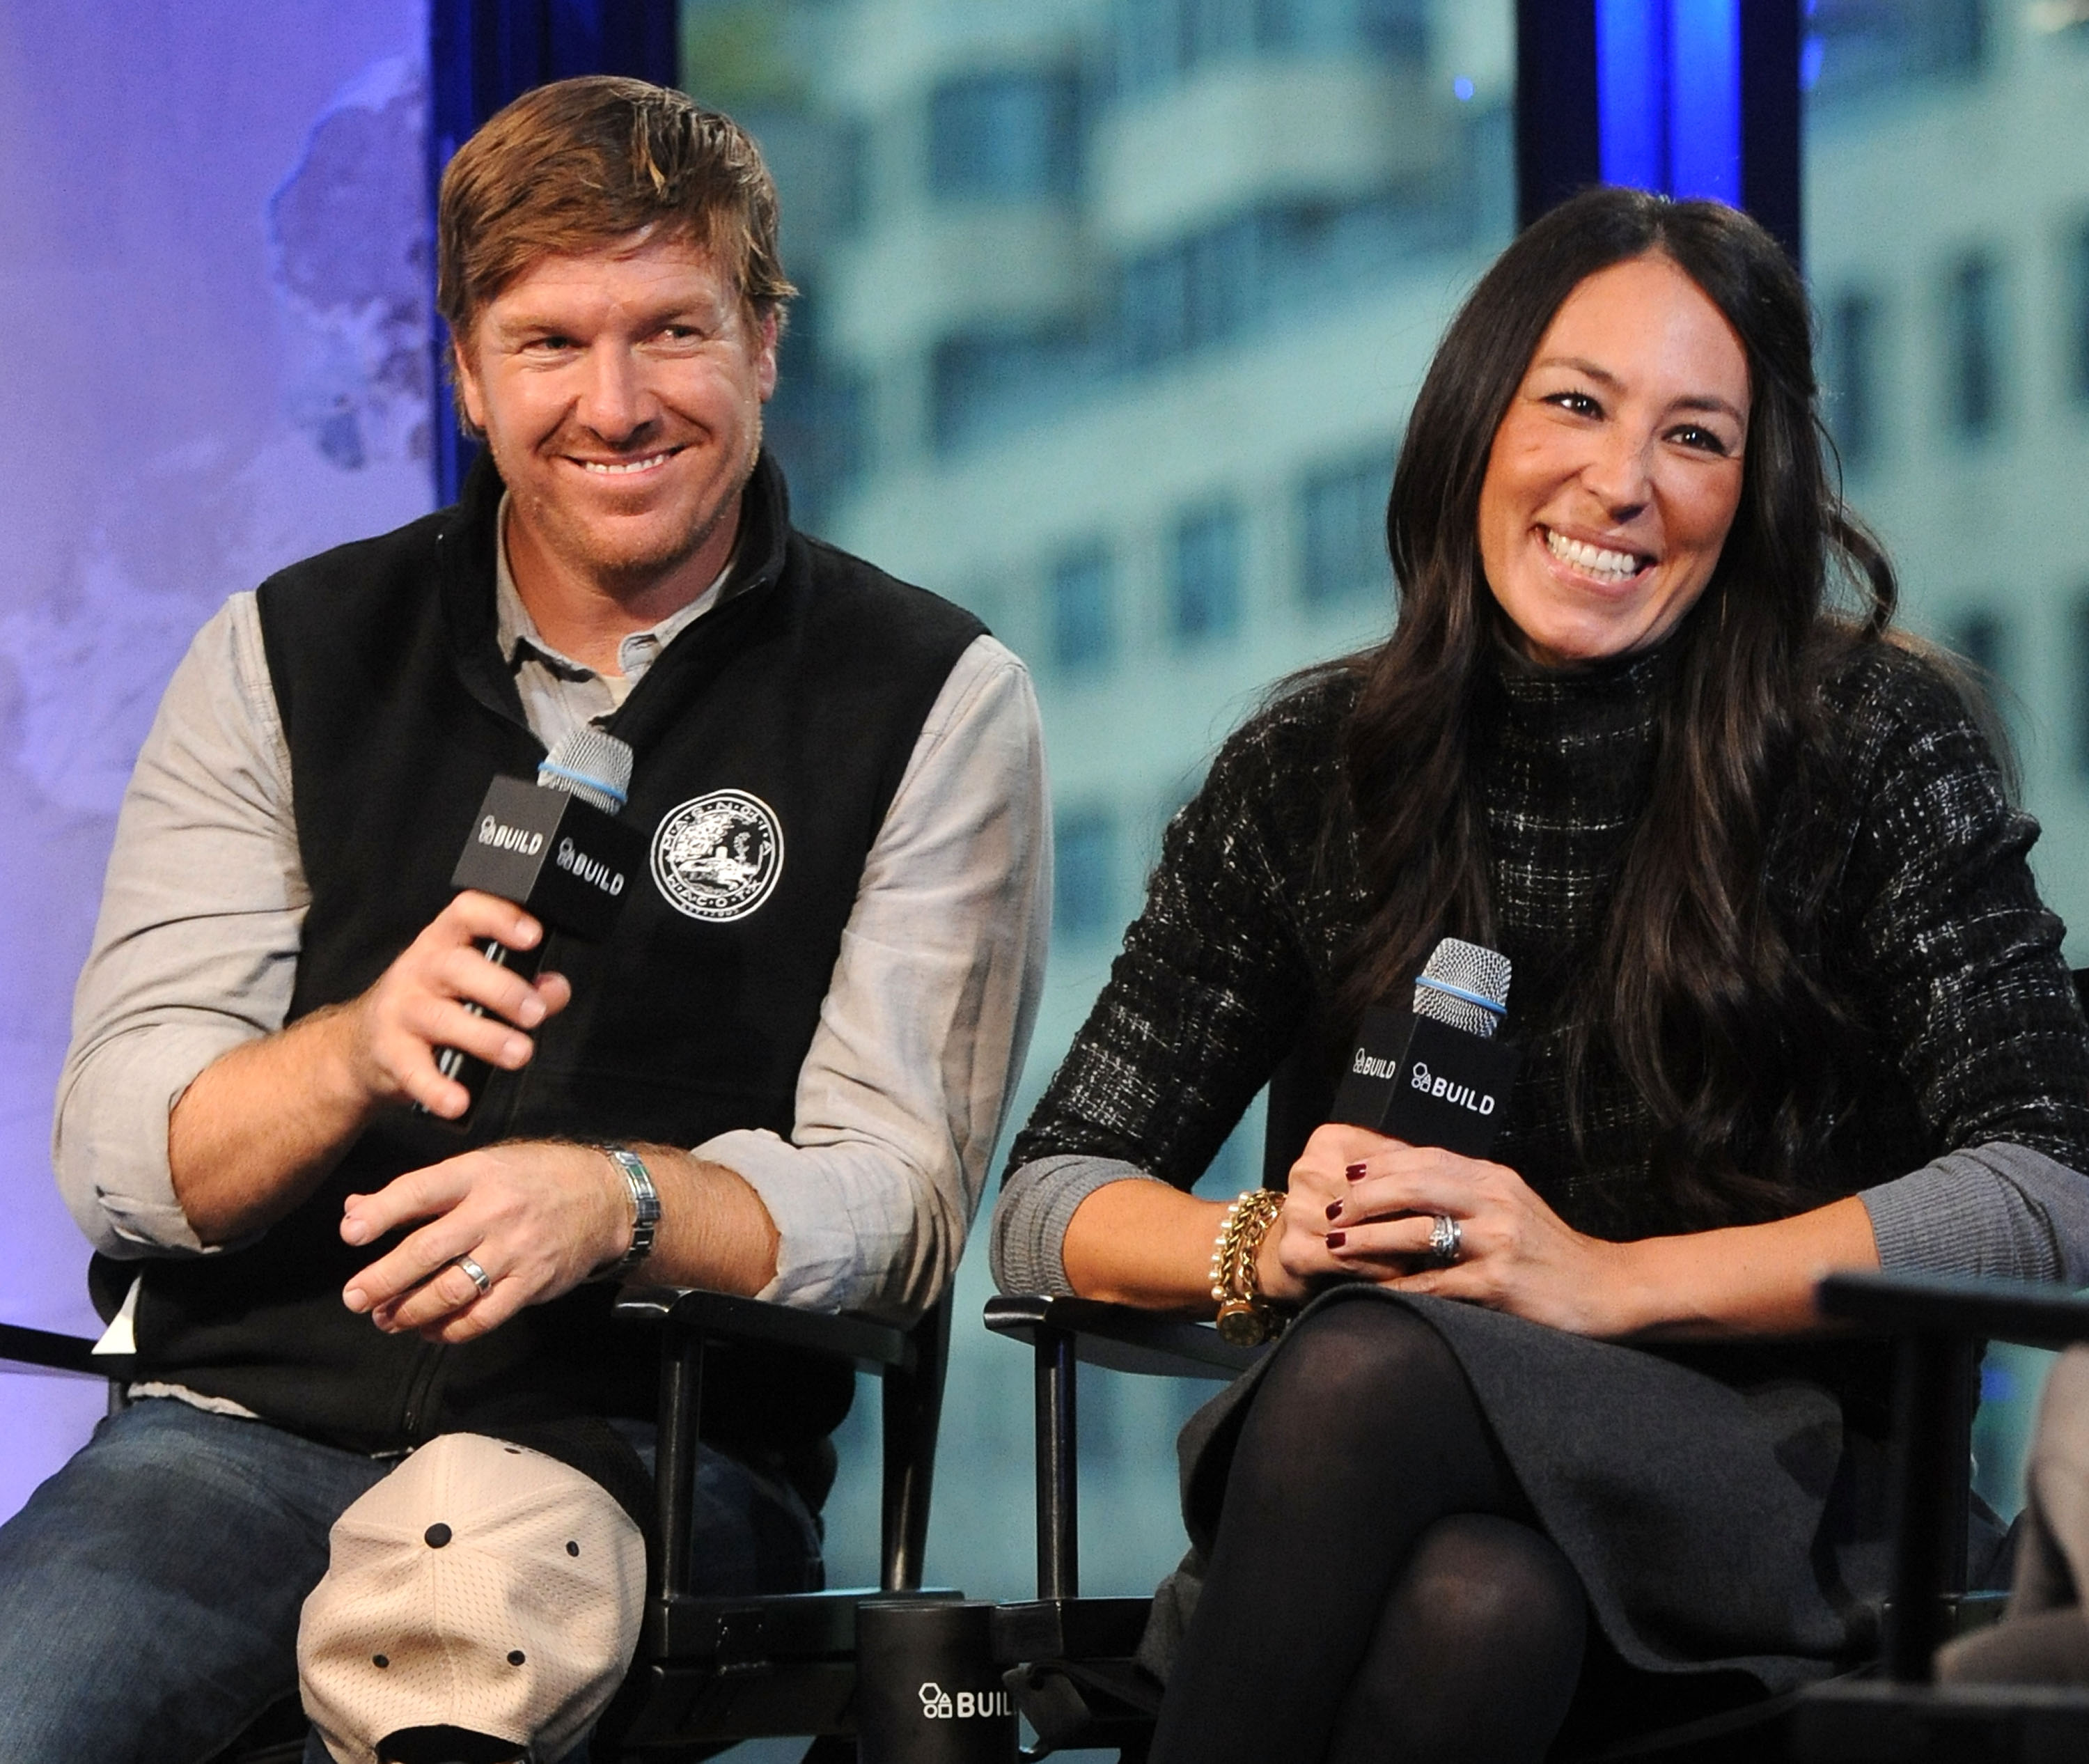 Chip and Joanna Gaines during an interview